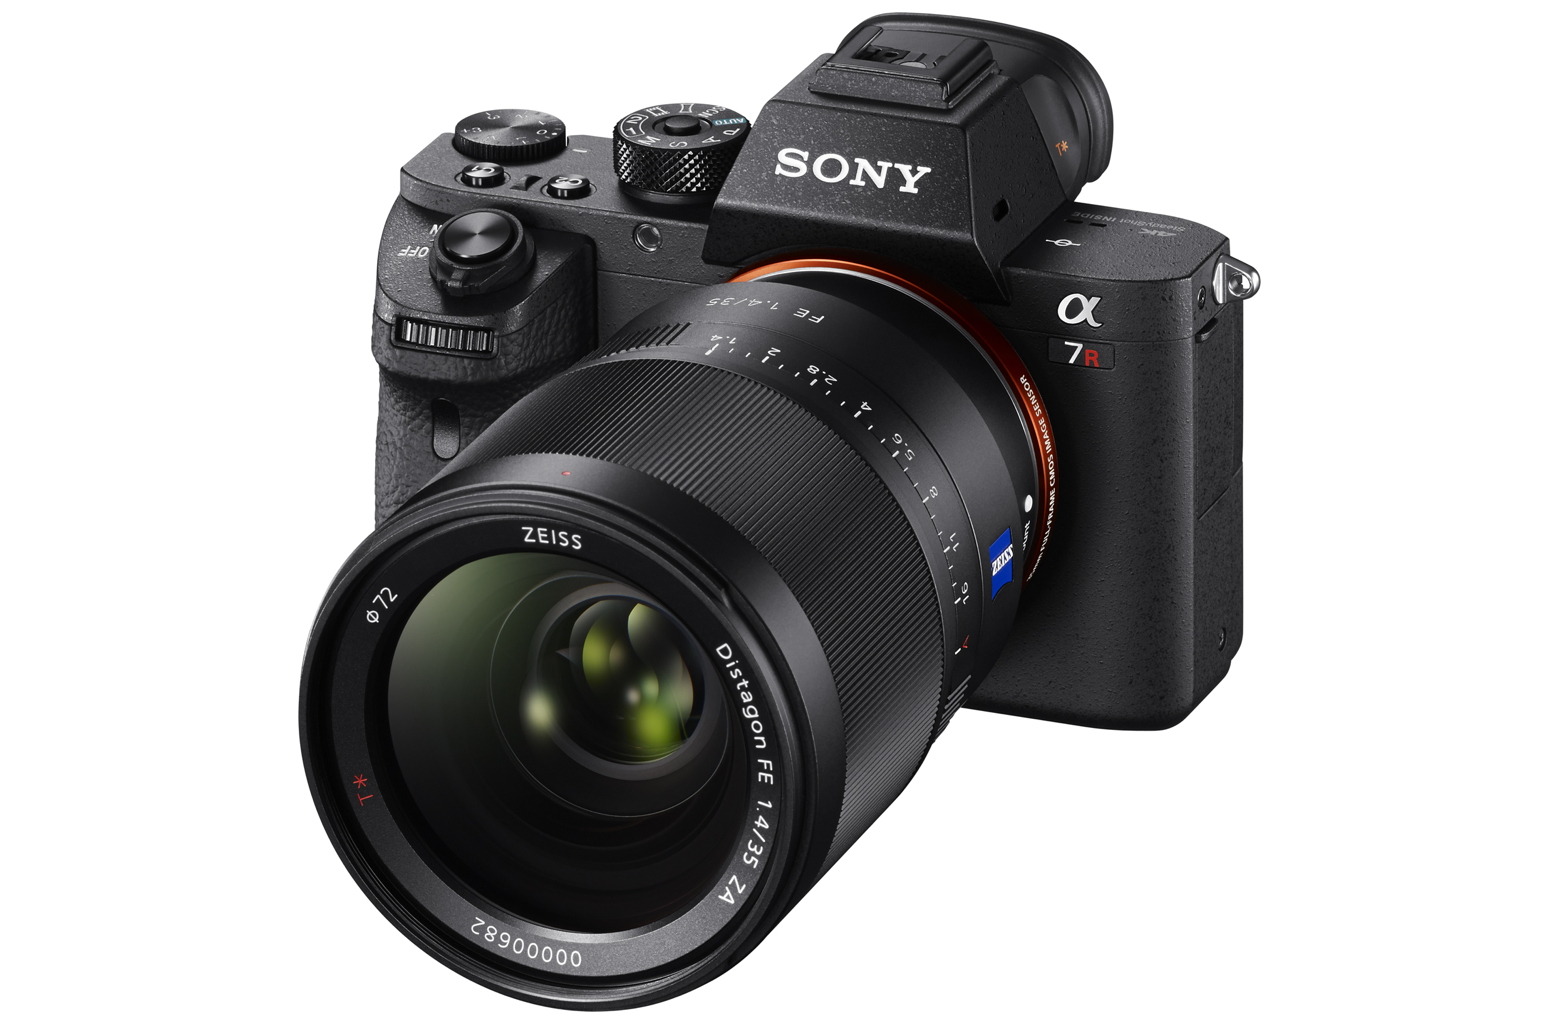 My thoughts about the Sony Alpha 7r II - phillipreeve.net